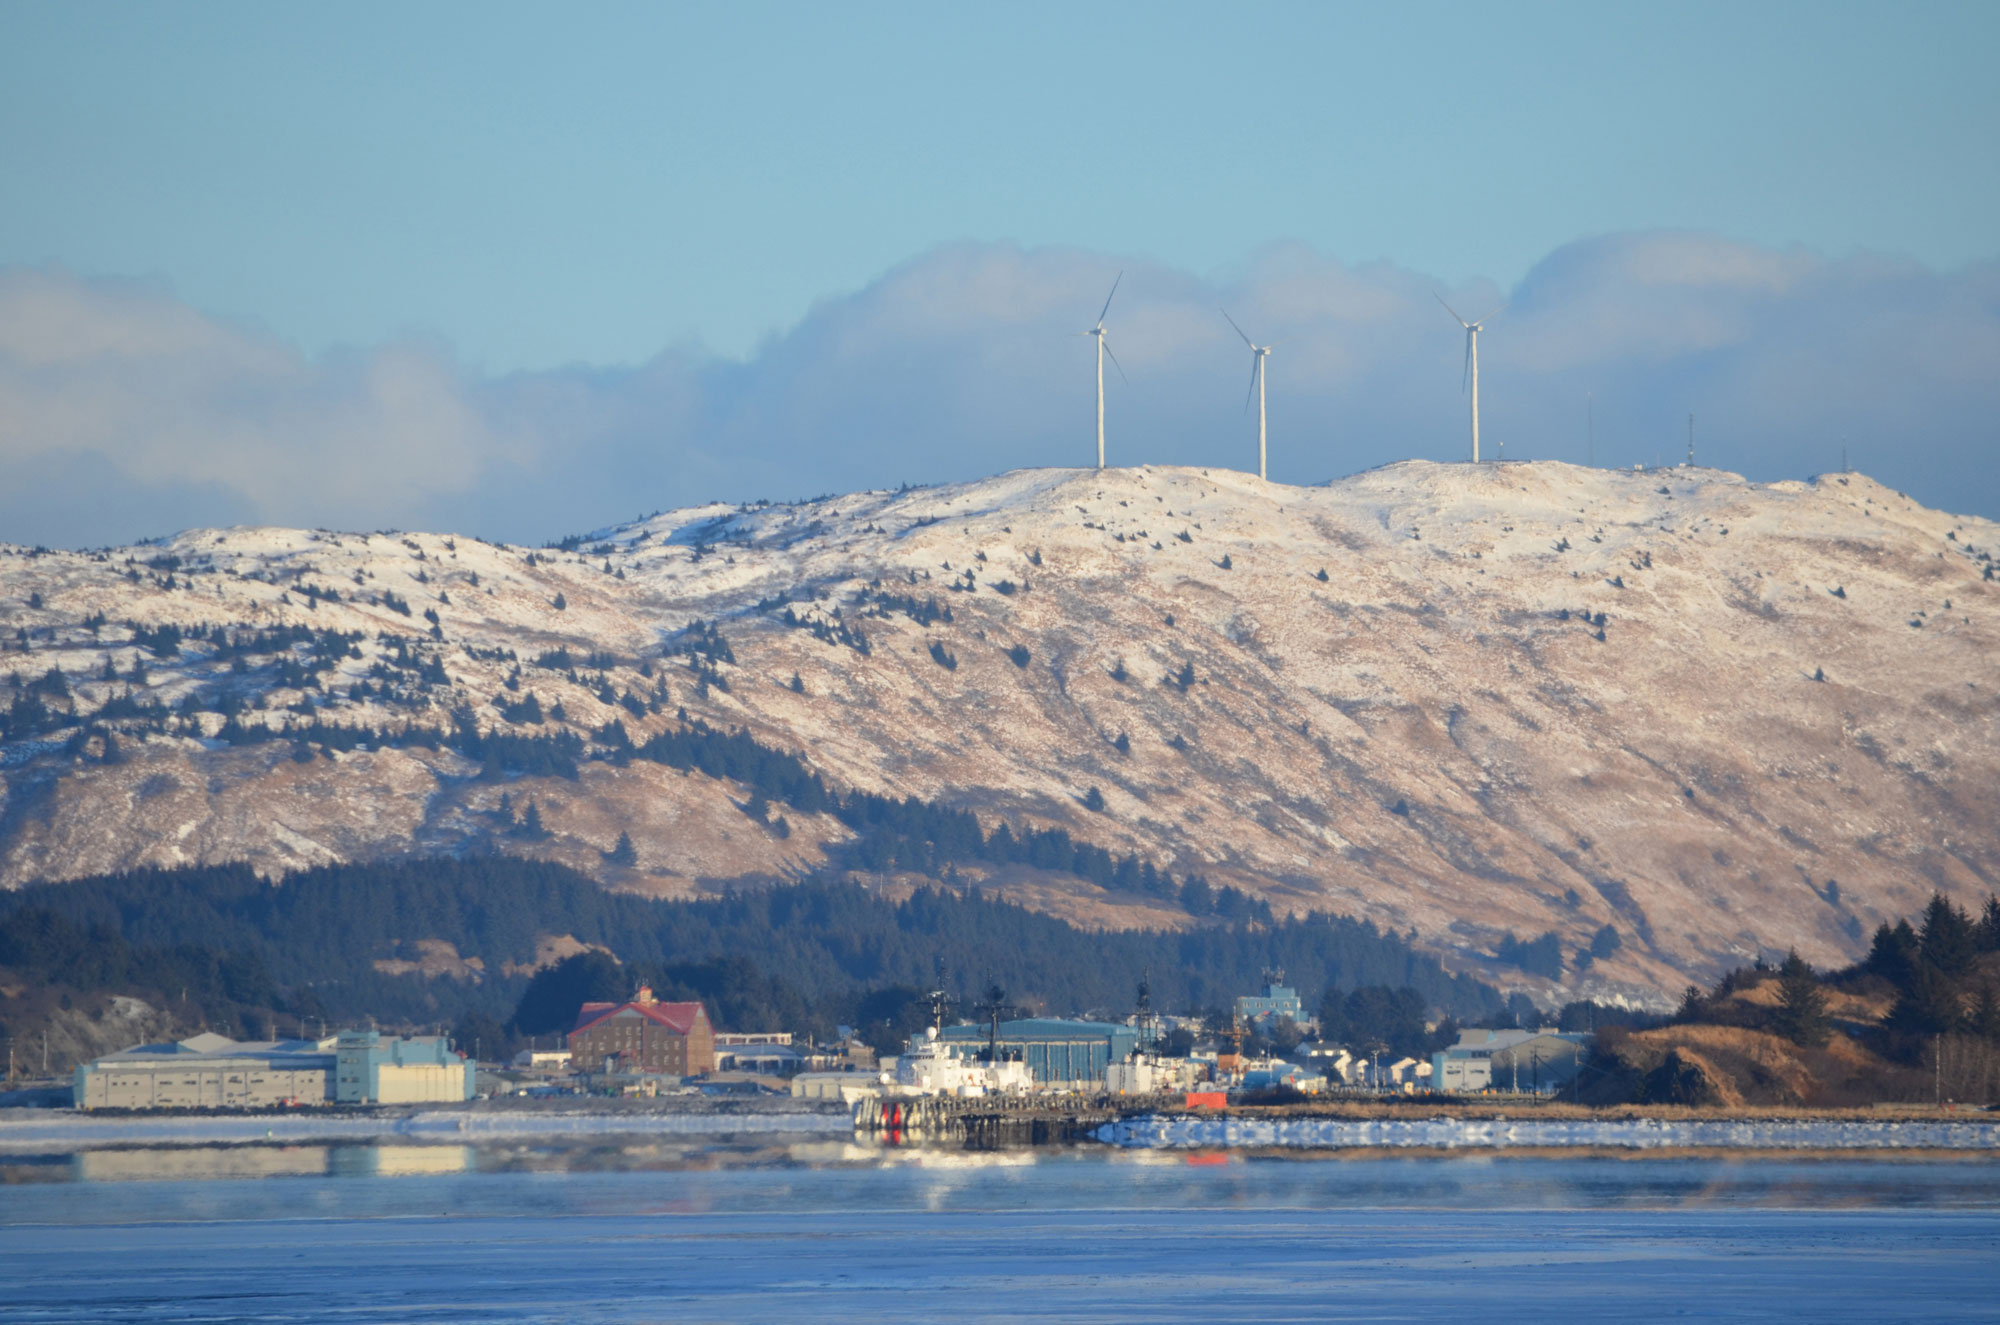 Photograph of wind turbines on Kodiak, Alaska. The photo shows three large white wind turbines on top of a snow-dusted hill. A cluster of buildings are grouped at the base of the hill, near a shoreline.